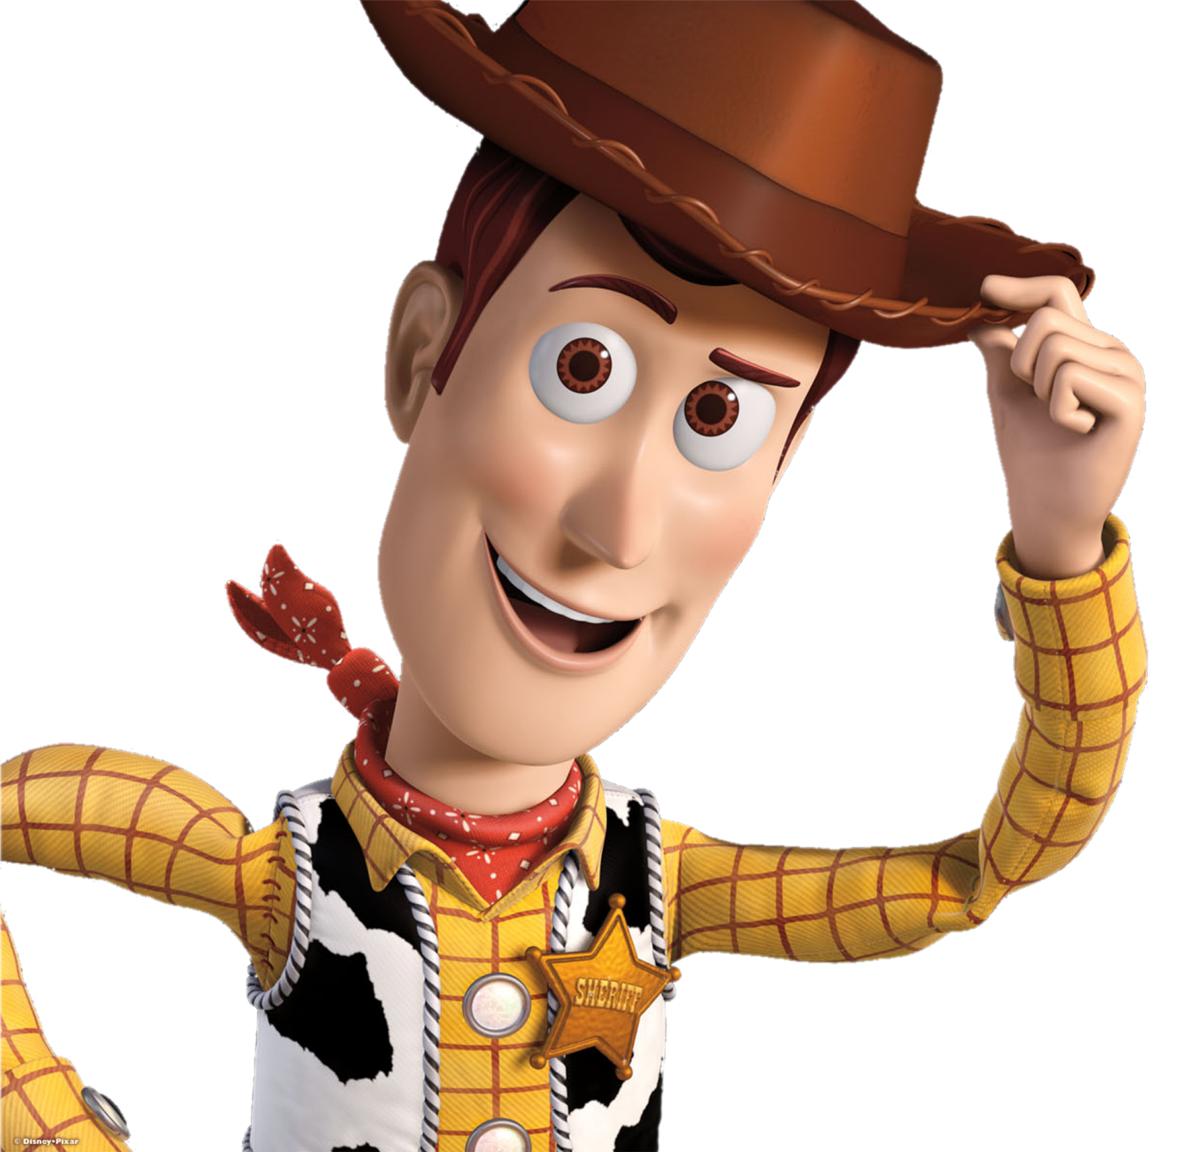 image For > Toy Story Woody Wallpaper